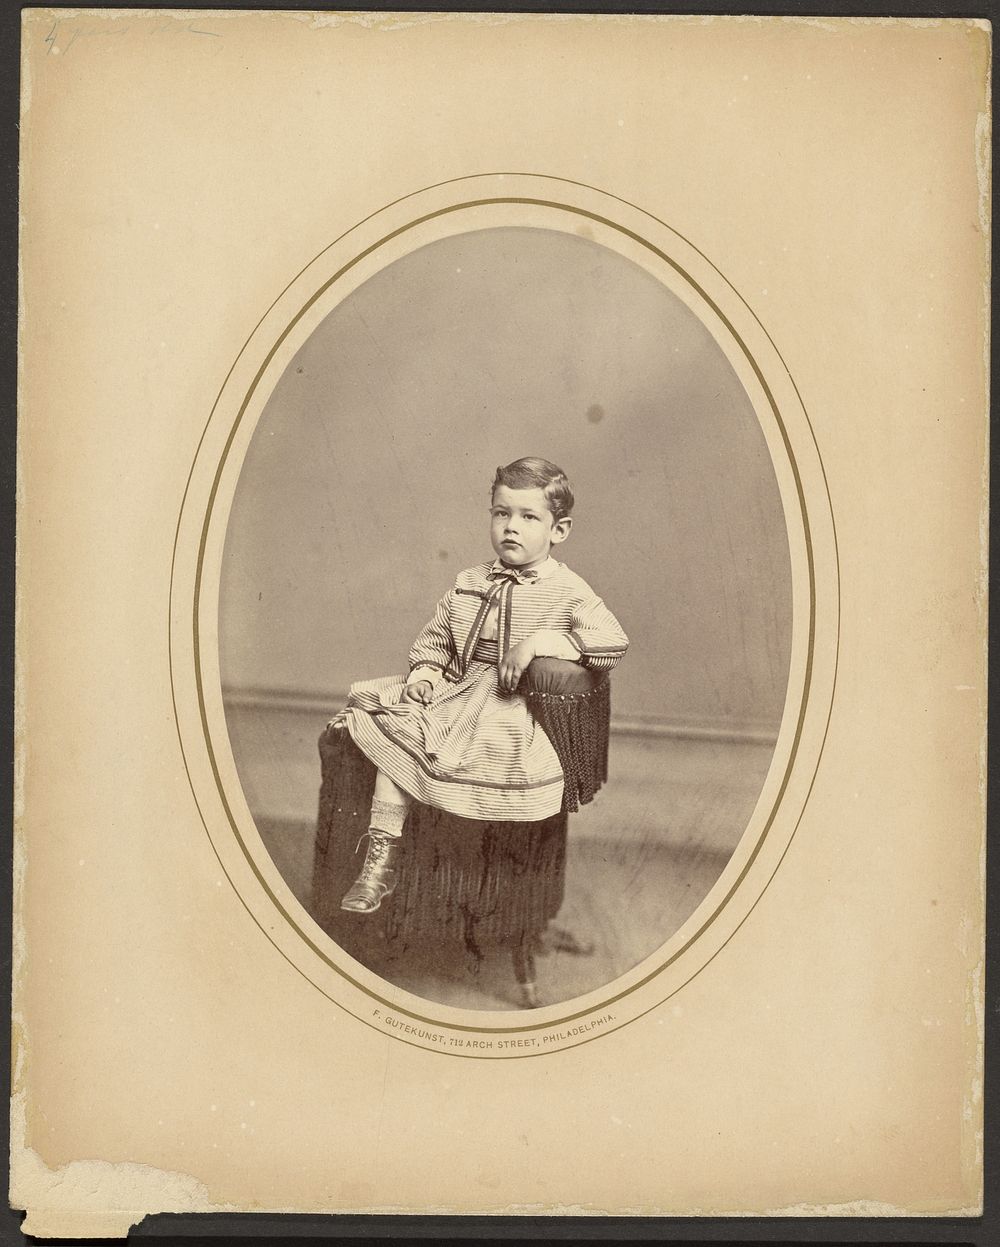 George Fauntleroy Davidson, Aged 3 Years & 10 months by Frederick Gutekunst